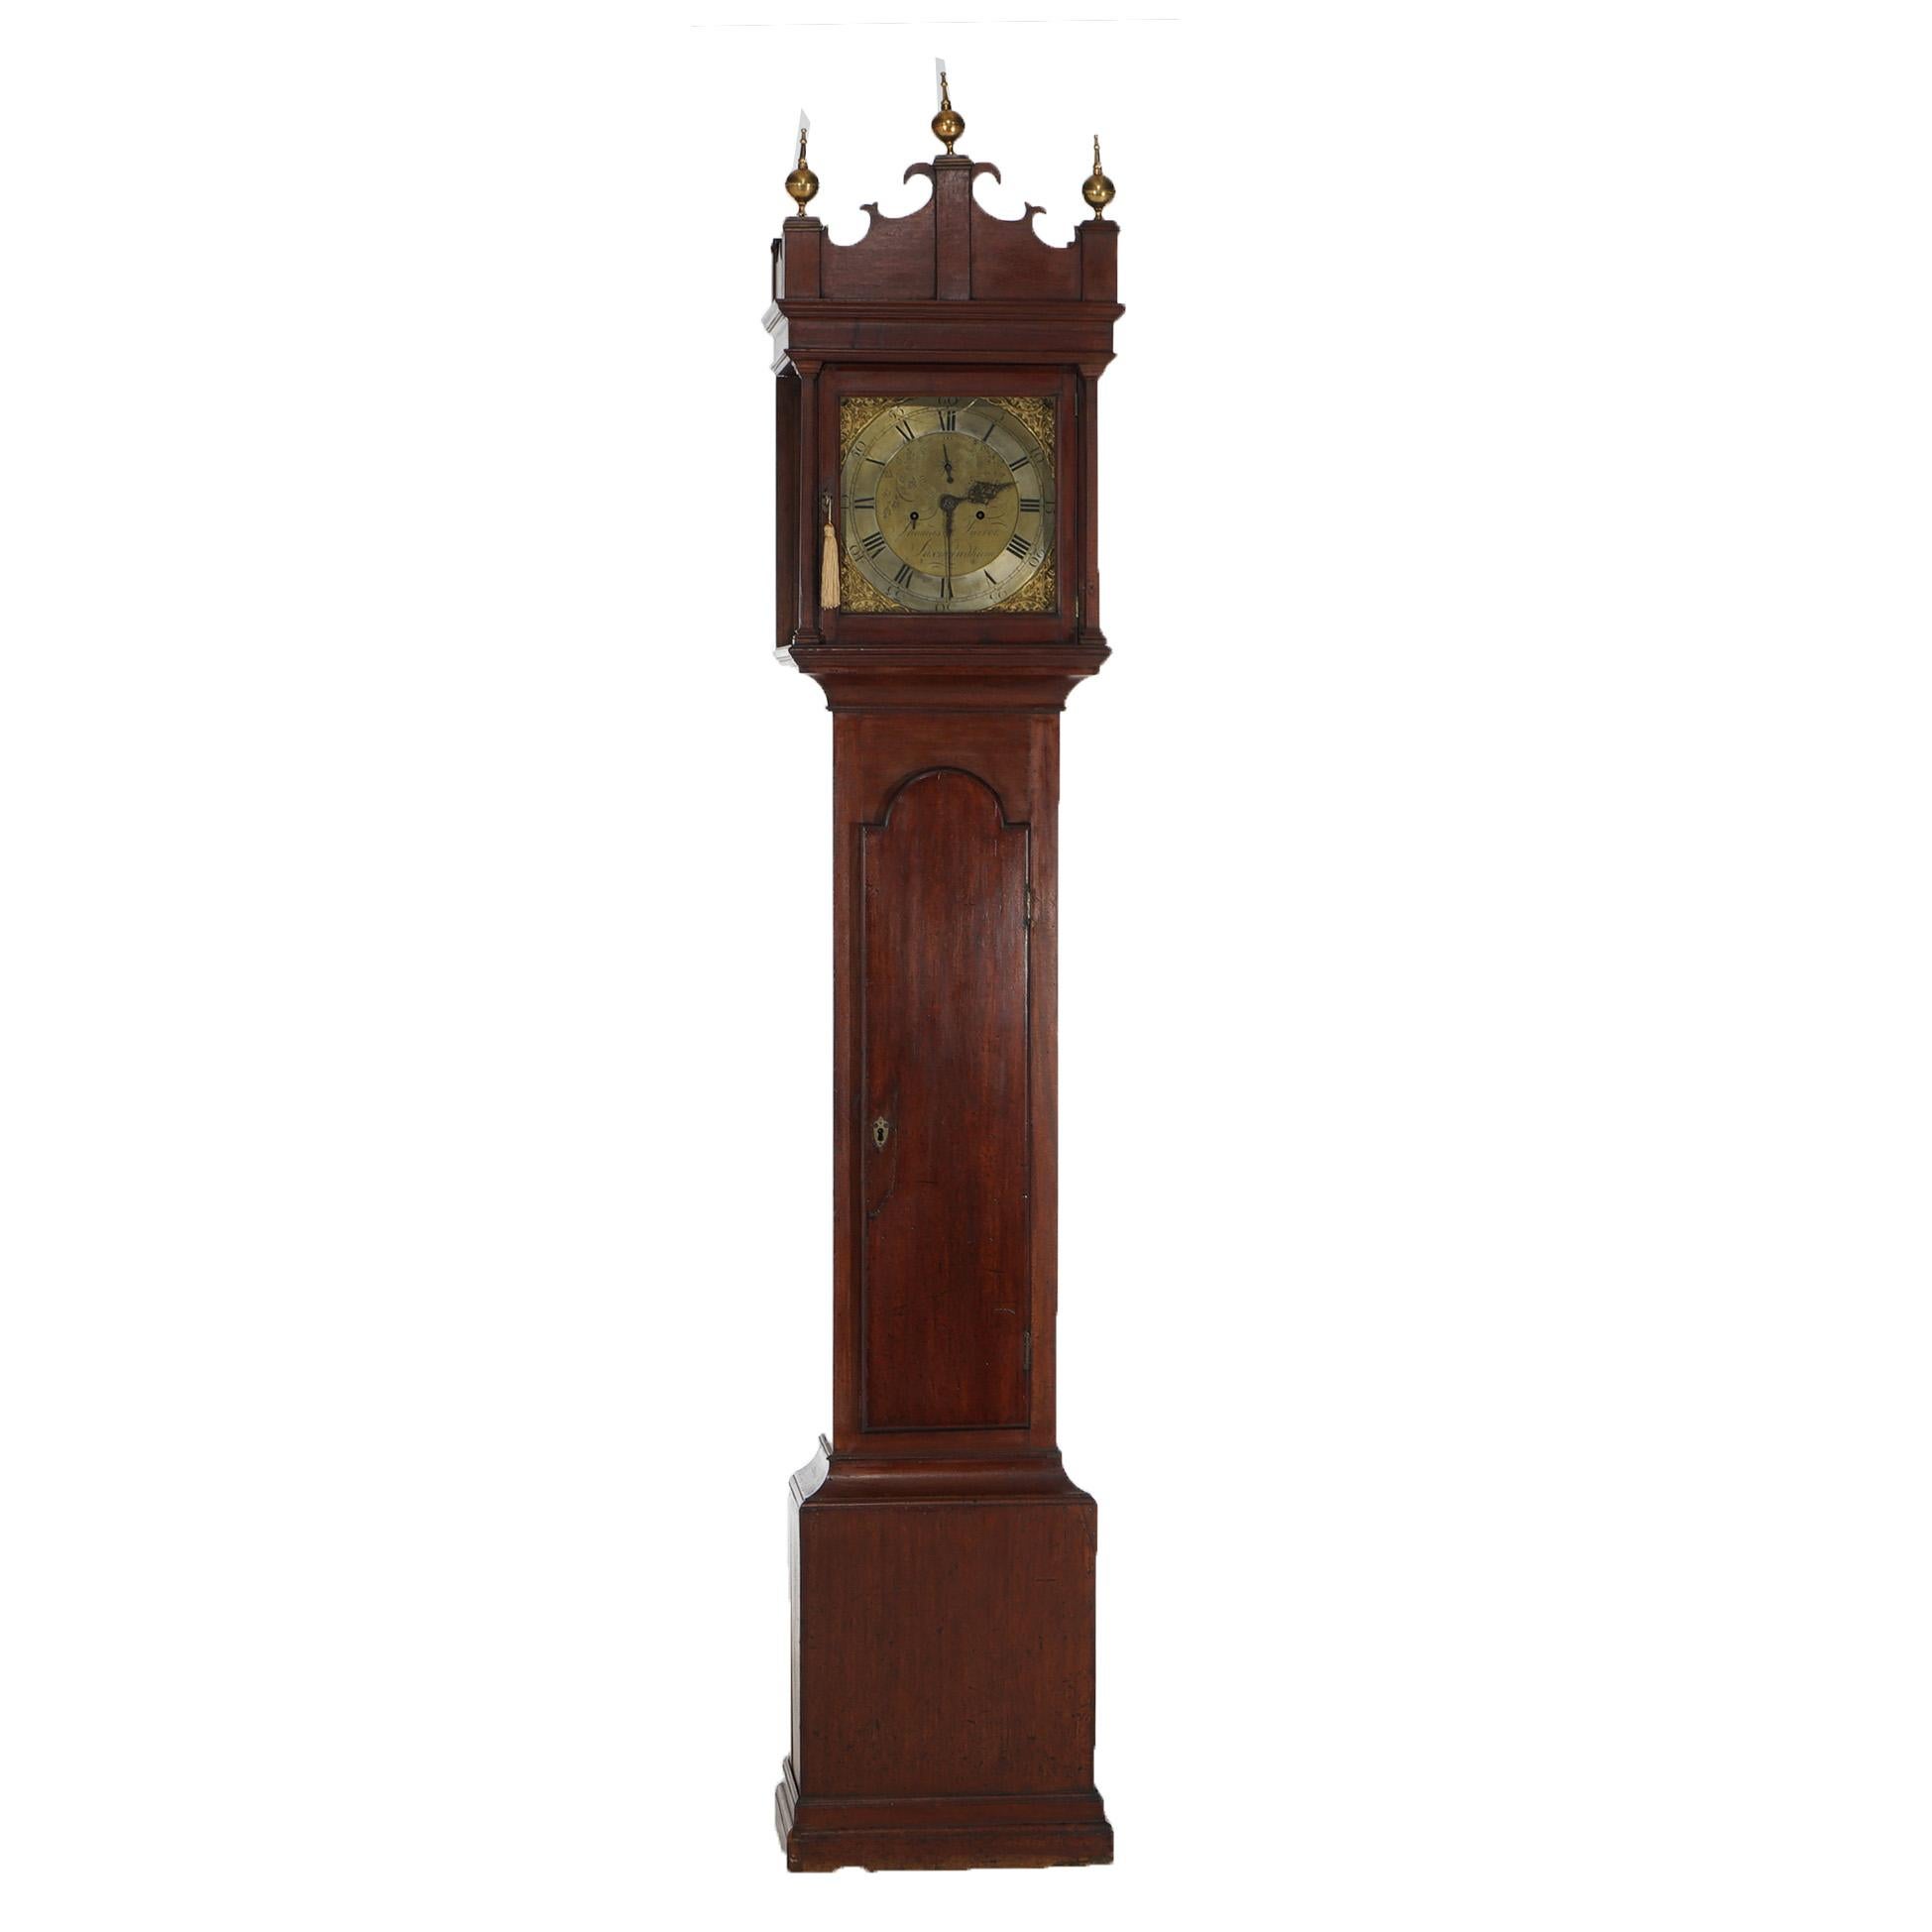 Antique Thomas Farrer Mahogany Grandfather Clock with Brass Finials 19thC

Measures - 94